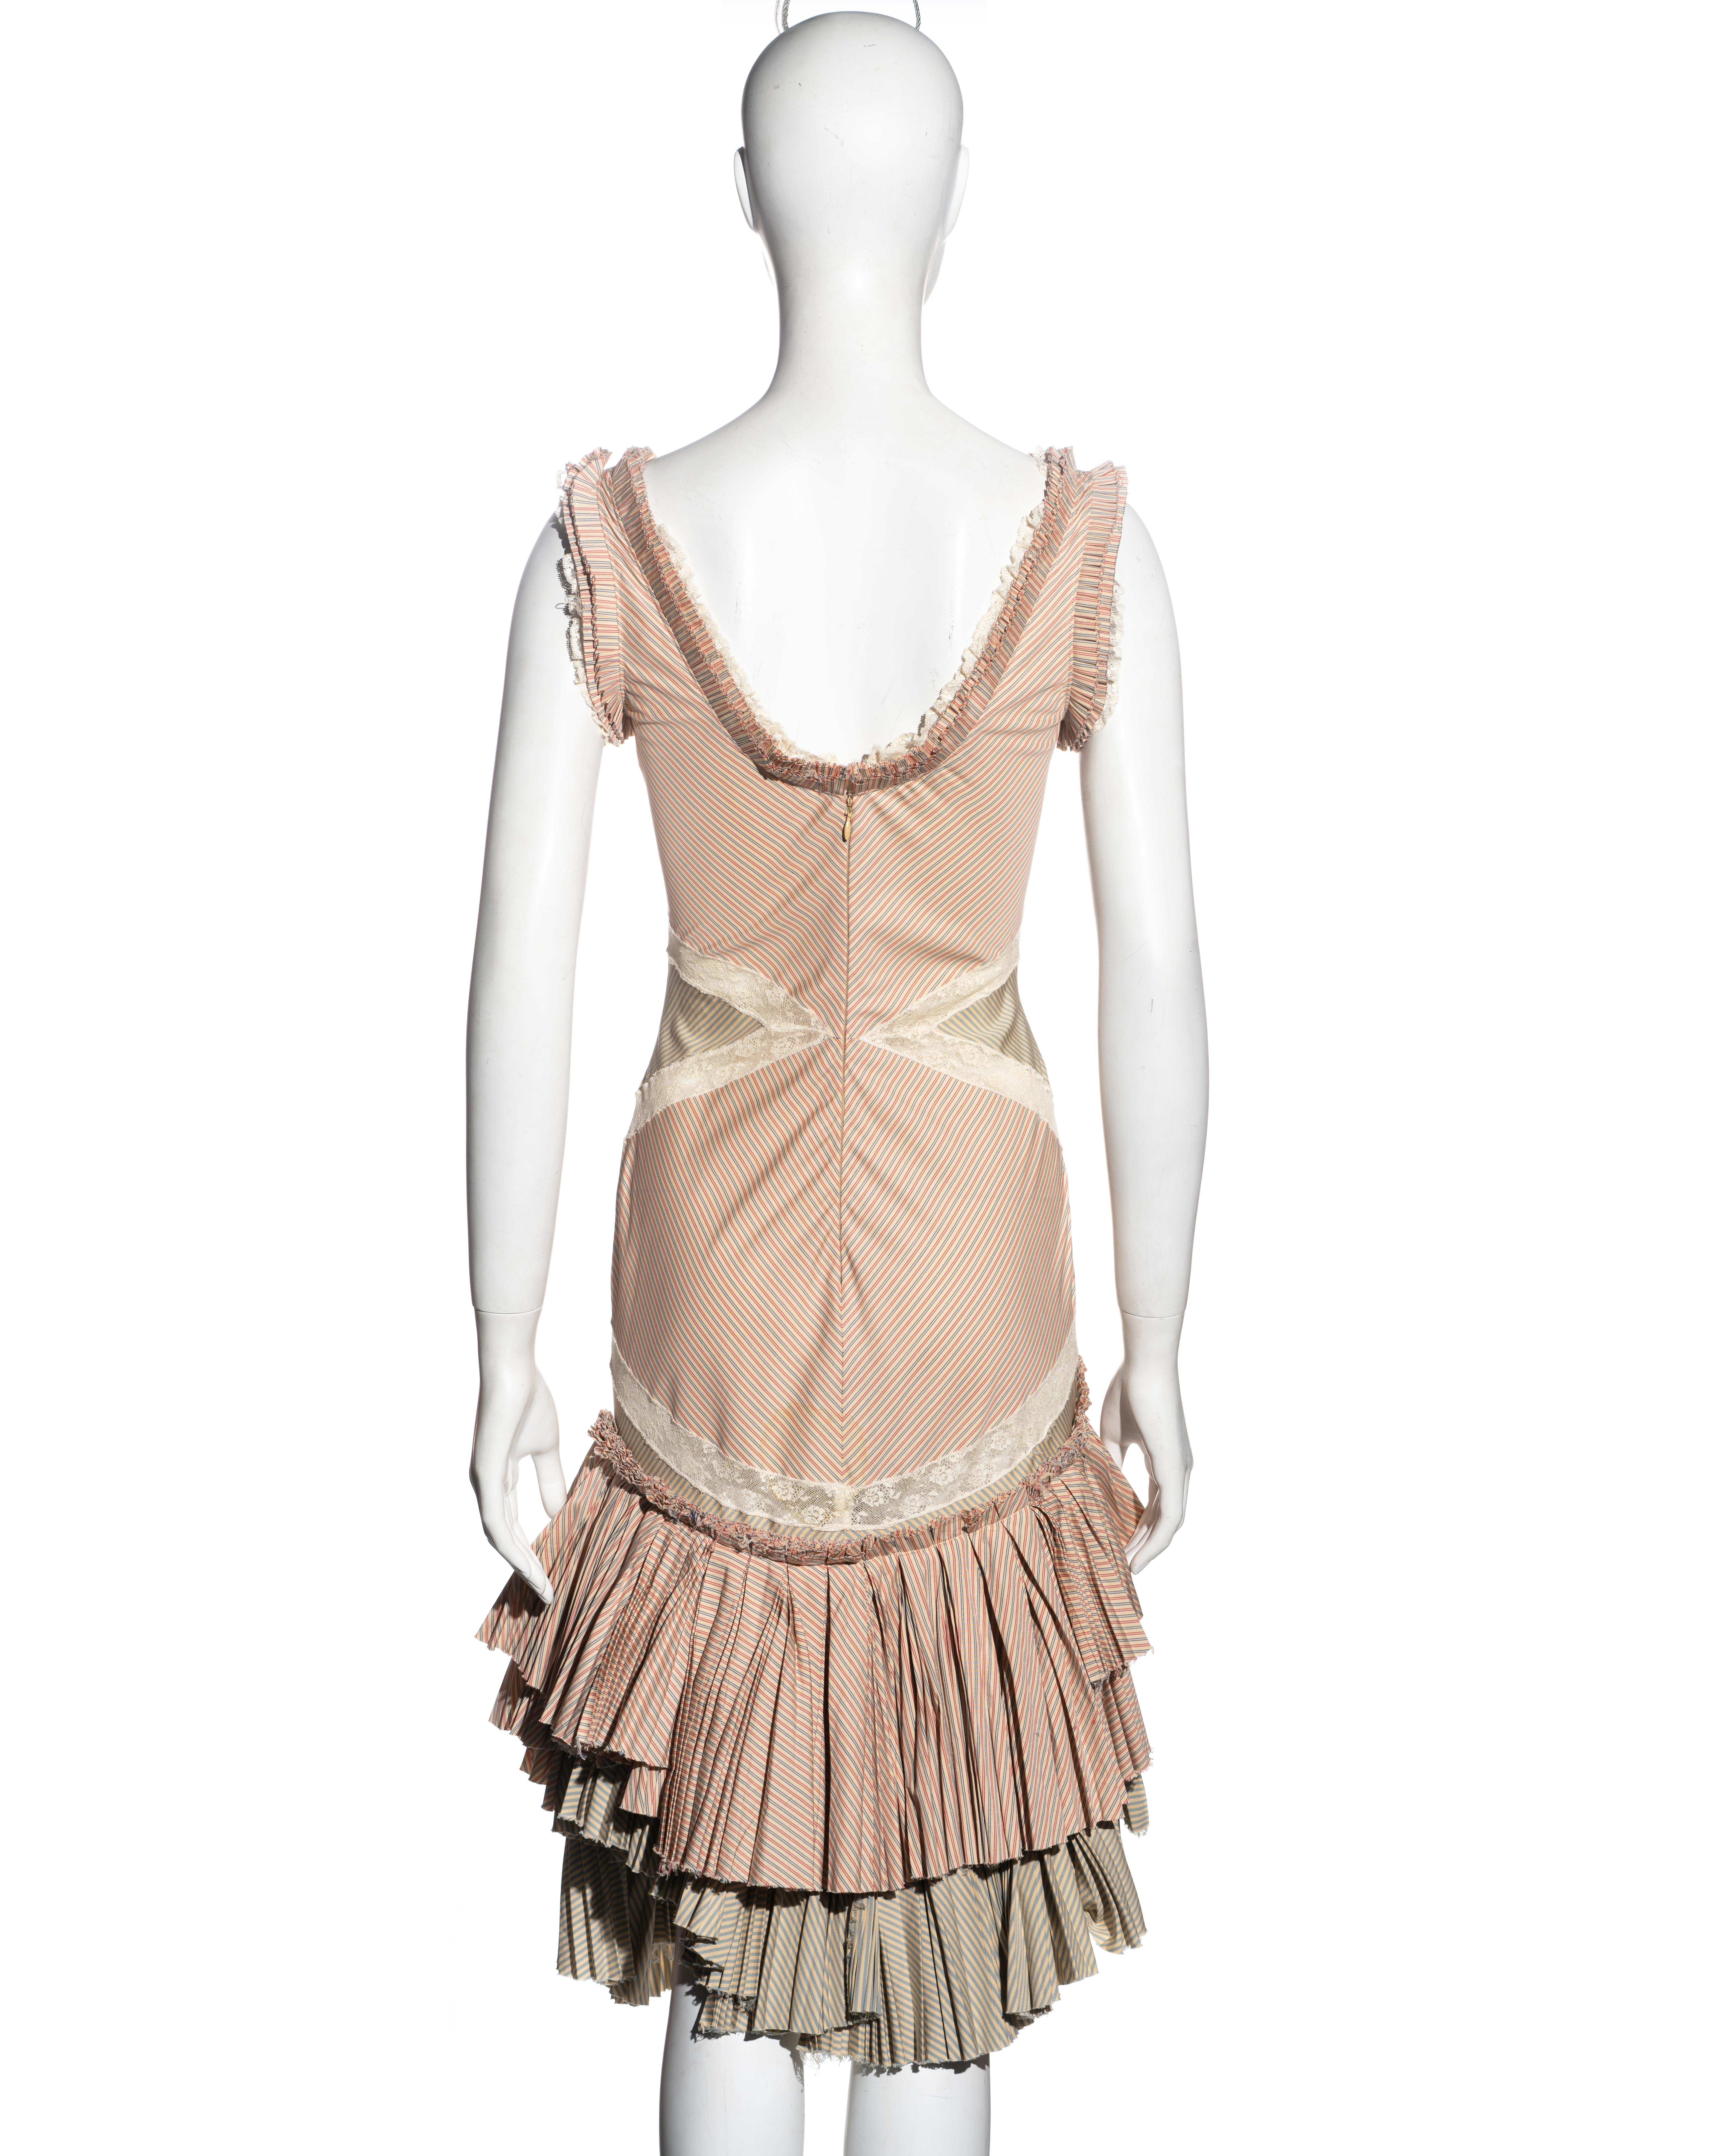 Alexander McQueen striped cotton and lace dress with pleated skirt, ss 2005 For Sale 2